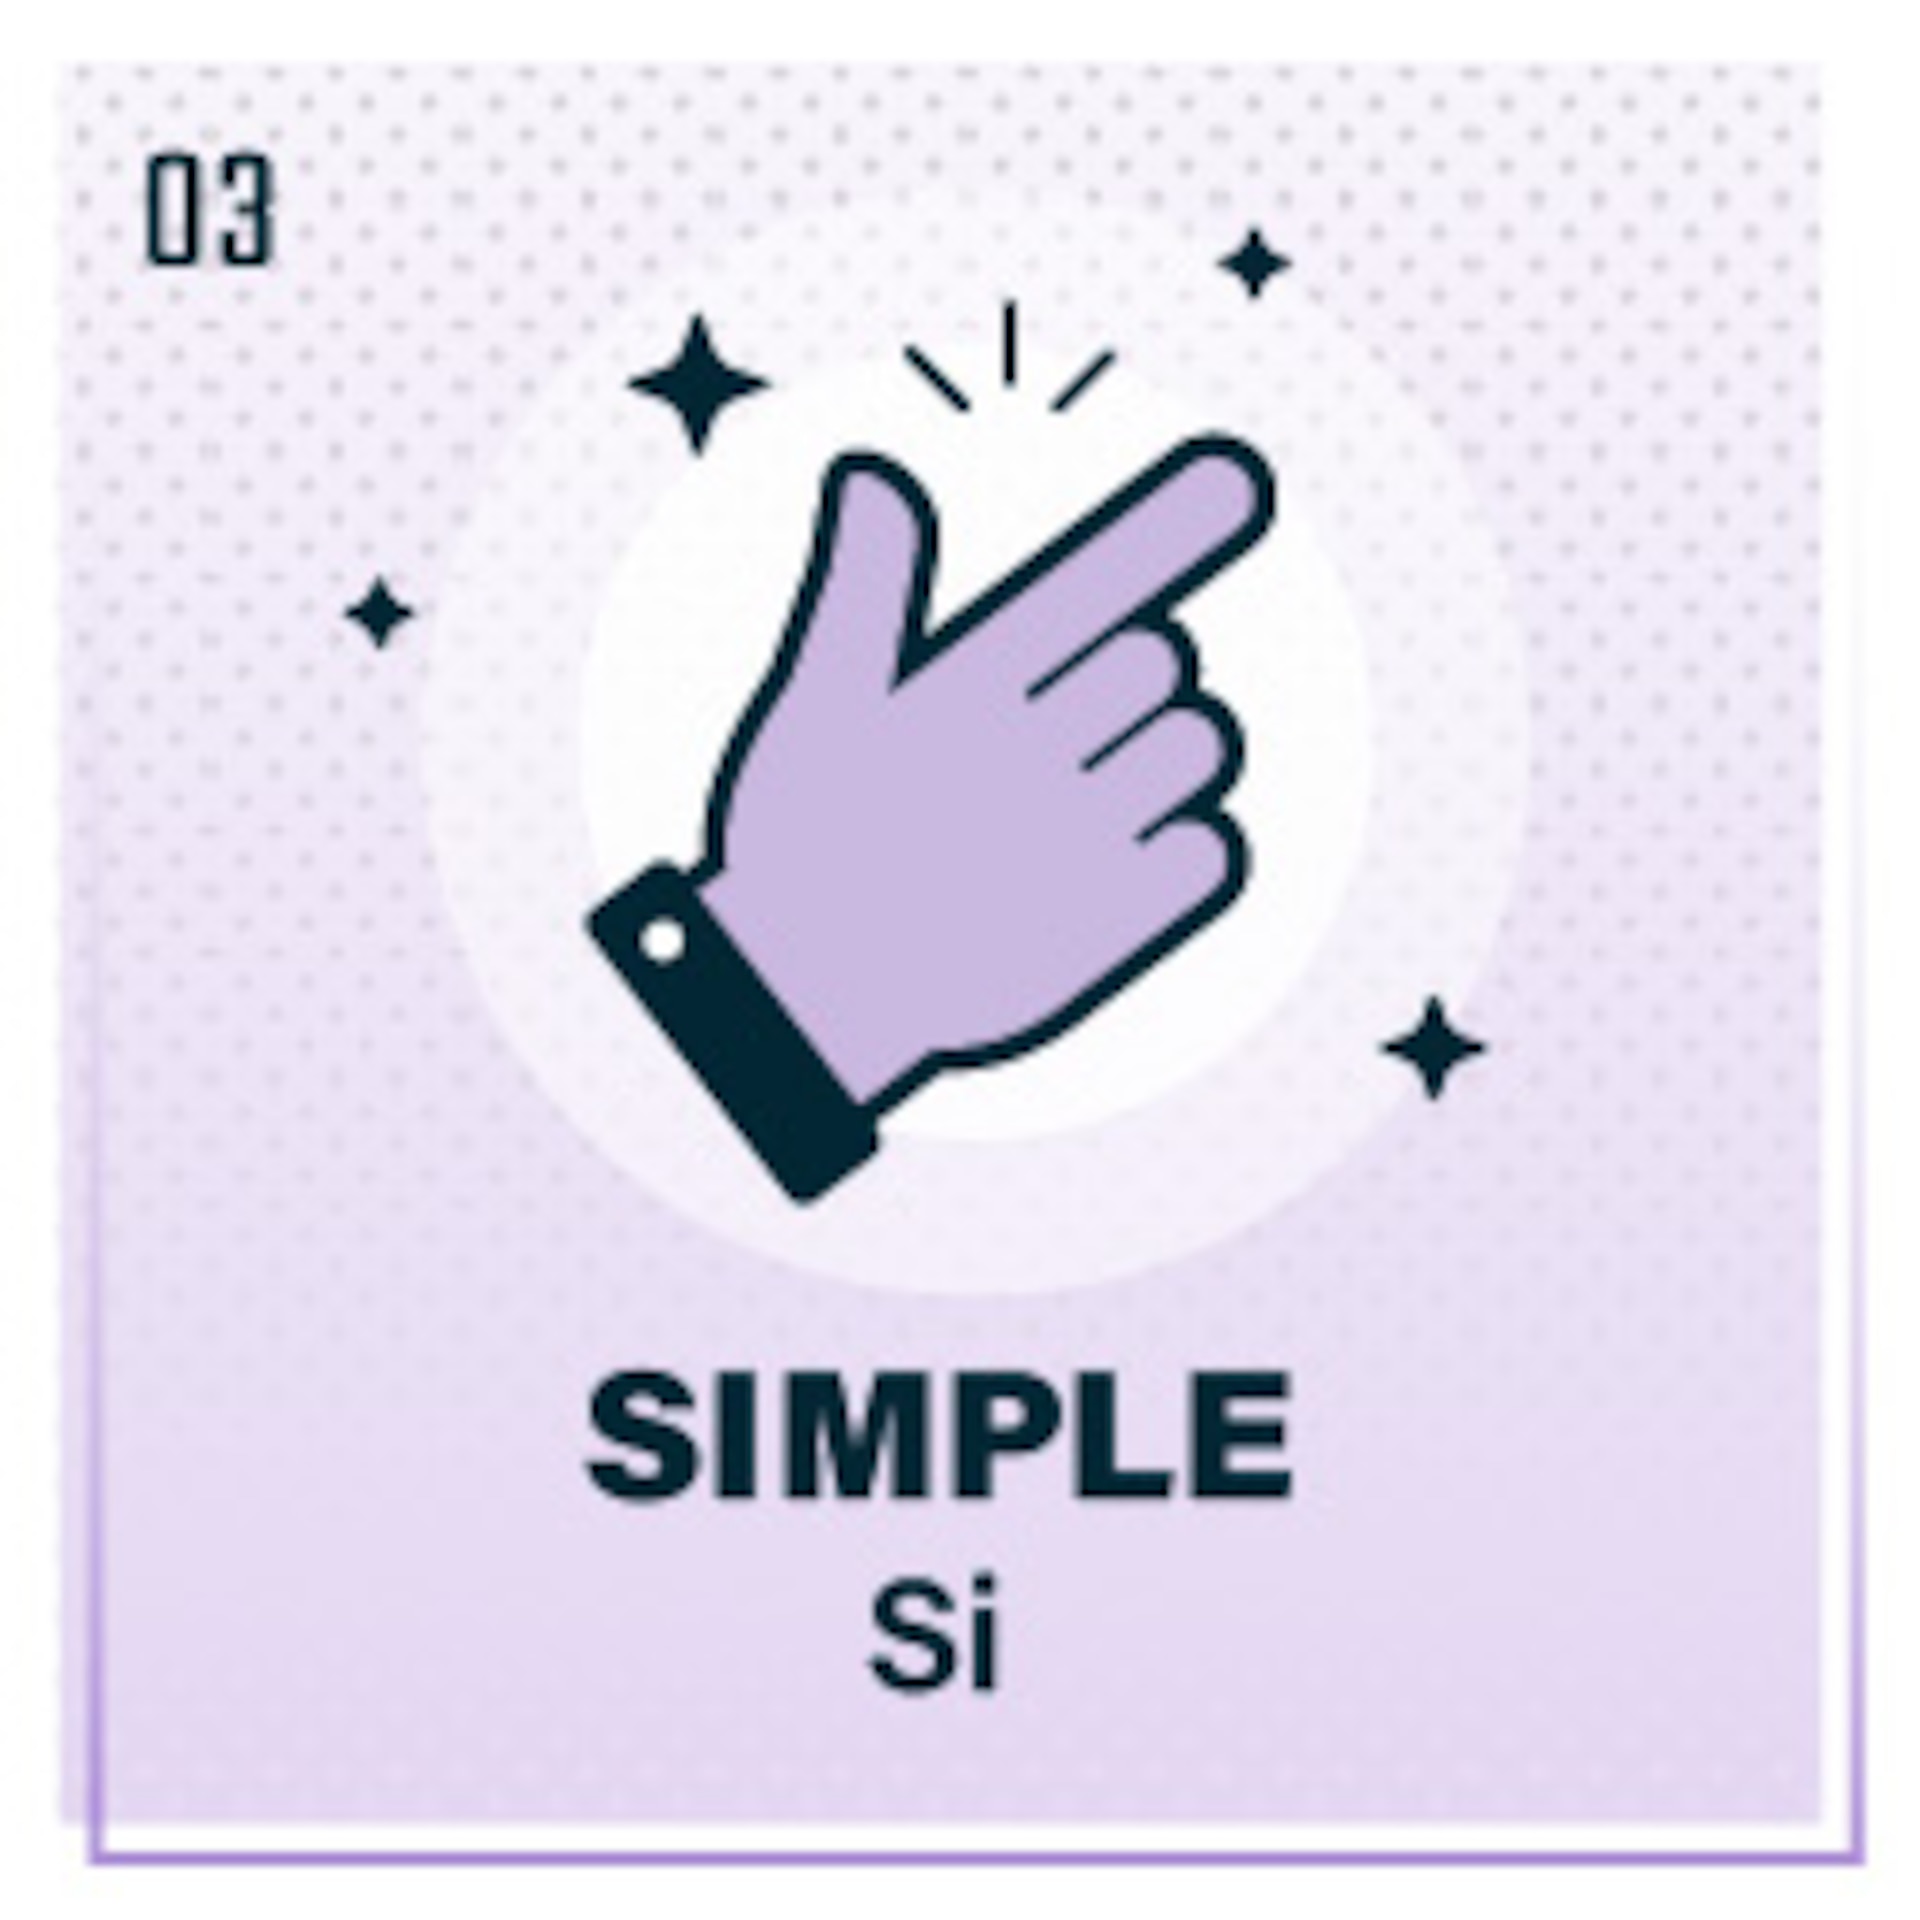 Illustration of a hand pointing with the letters Si.